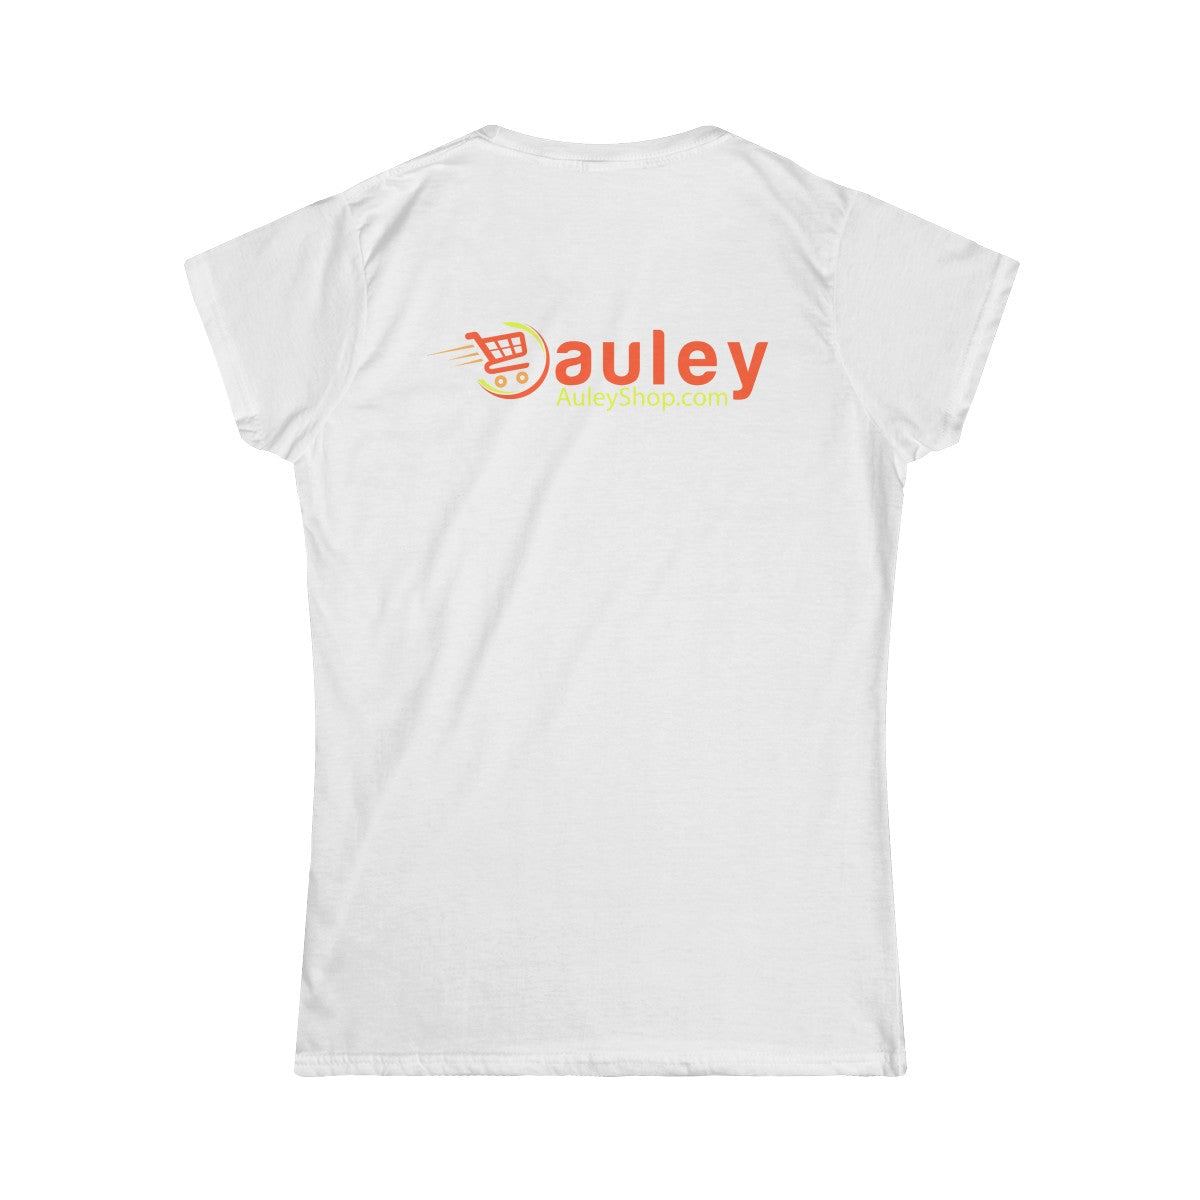 Women's Softstyle Tee (AuleyShop.com Lime Color)-T-Shirt-AULEY